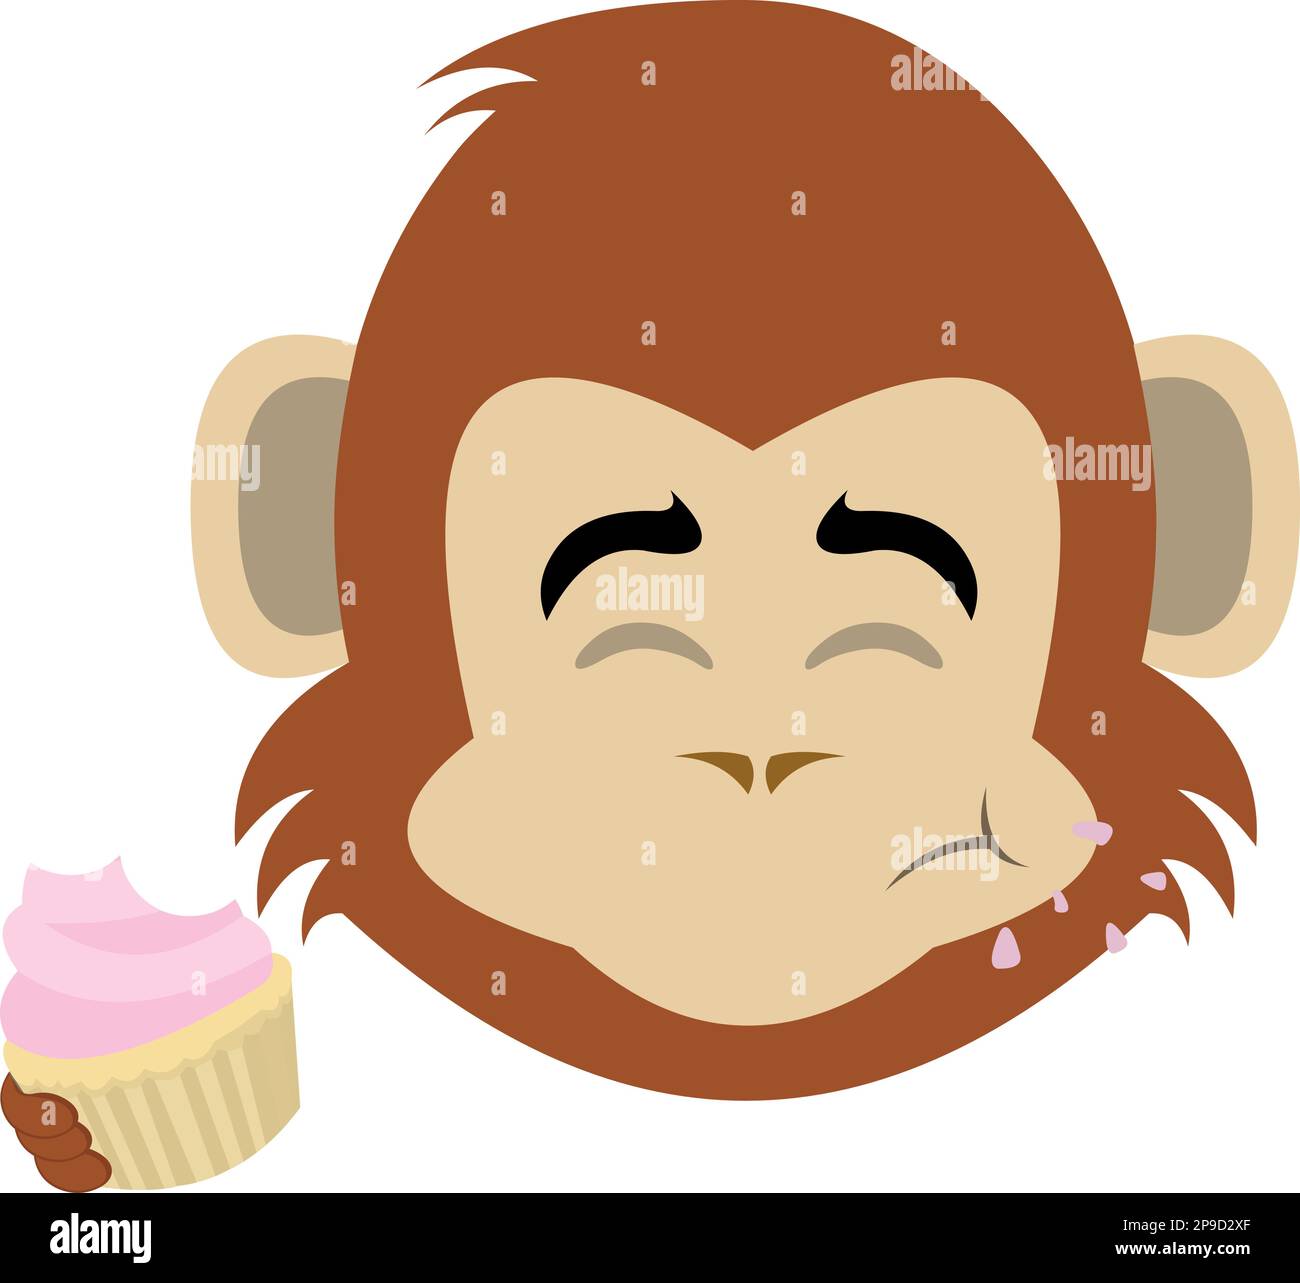 vector illustration face of a monkey primate cartoon eating a cupcake or muffin Stock Vector